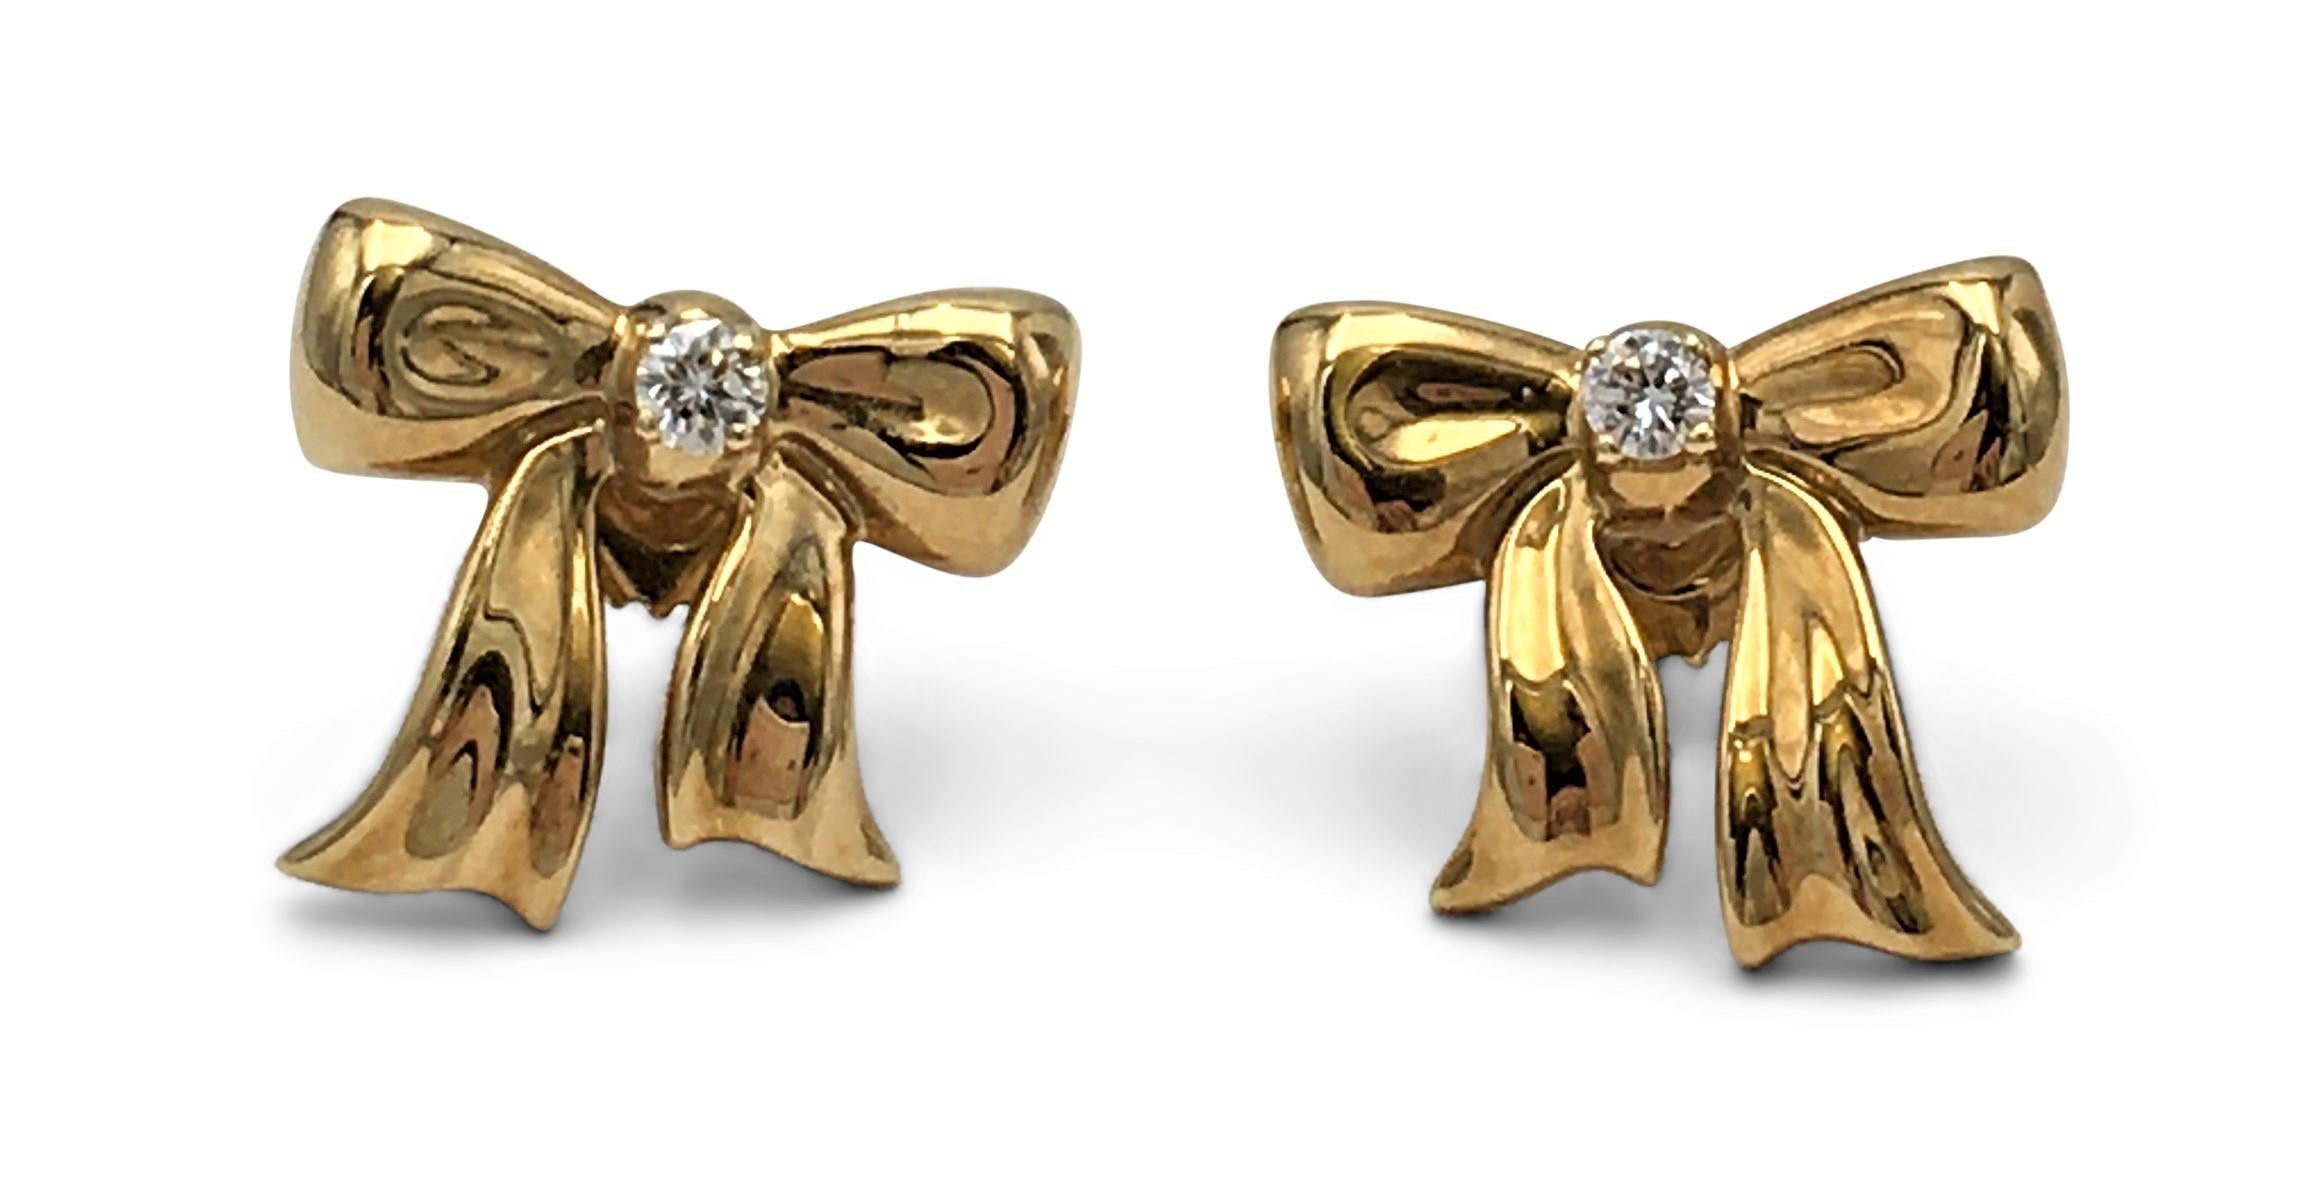 Authentic whimsical Tiffany & Co. bow earrings crafted in 18 karat yellow gold. Each bow is set with one diamond, weighing an estimated 0.05 carats. Signed T&Co., 750. The earrings are presented with the original pouch and box. CIRCA 1990s.